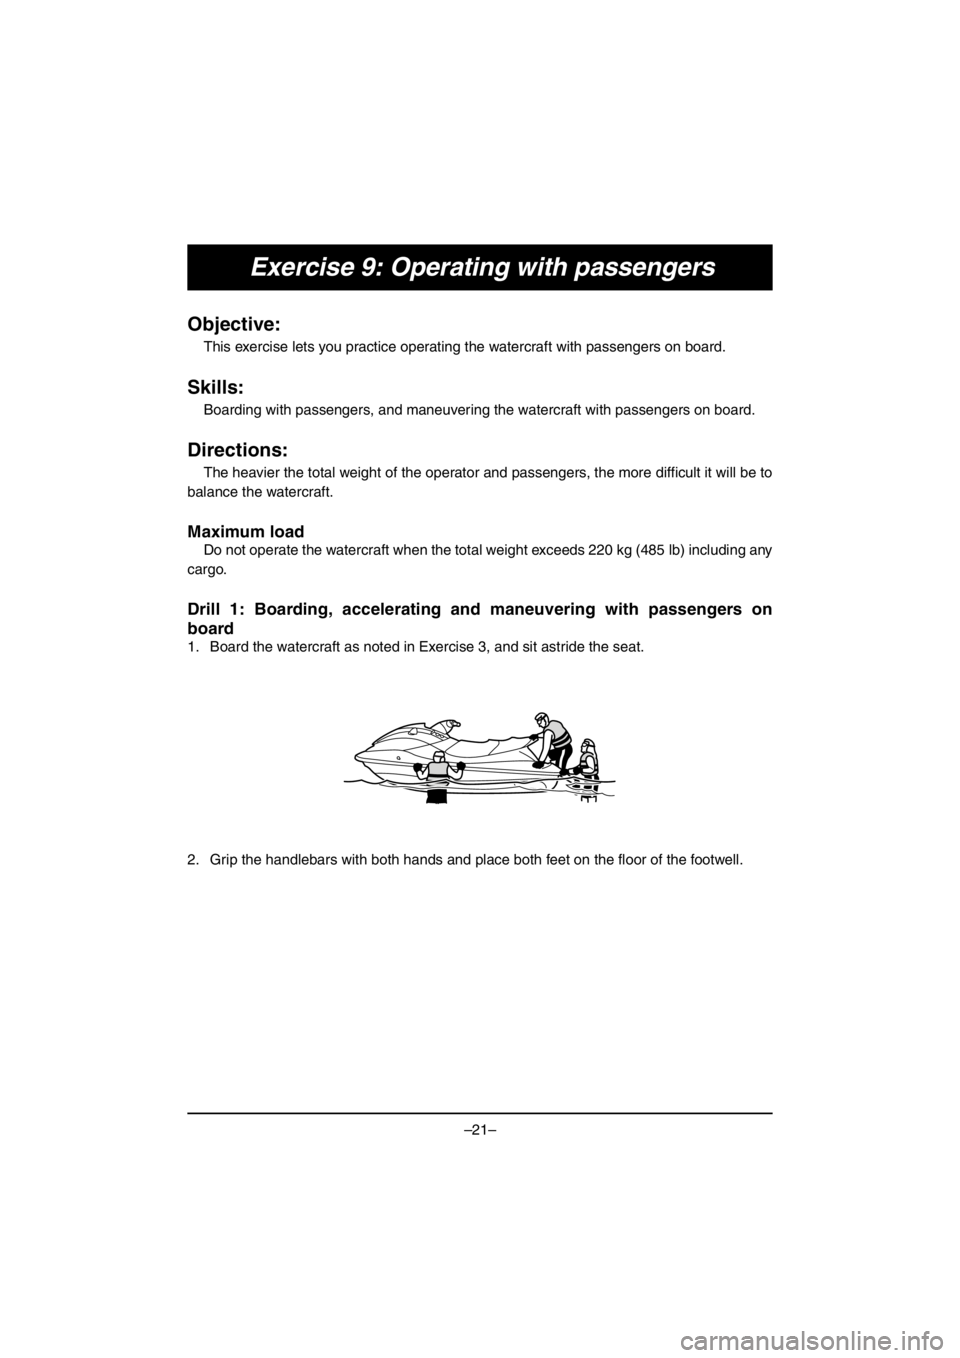 YAMAHA EX SPORT 2017  Manuale duso (in Italian) –21–
Exercise 9: Operating with passengers
Objective:
This exercise lets you practice operating the watercraft with passengers on board.
Skills:
Boarding with passengers, and maneuvering the water